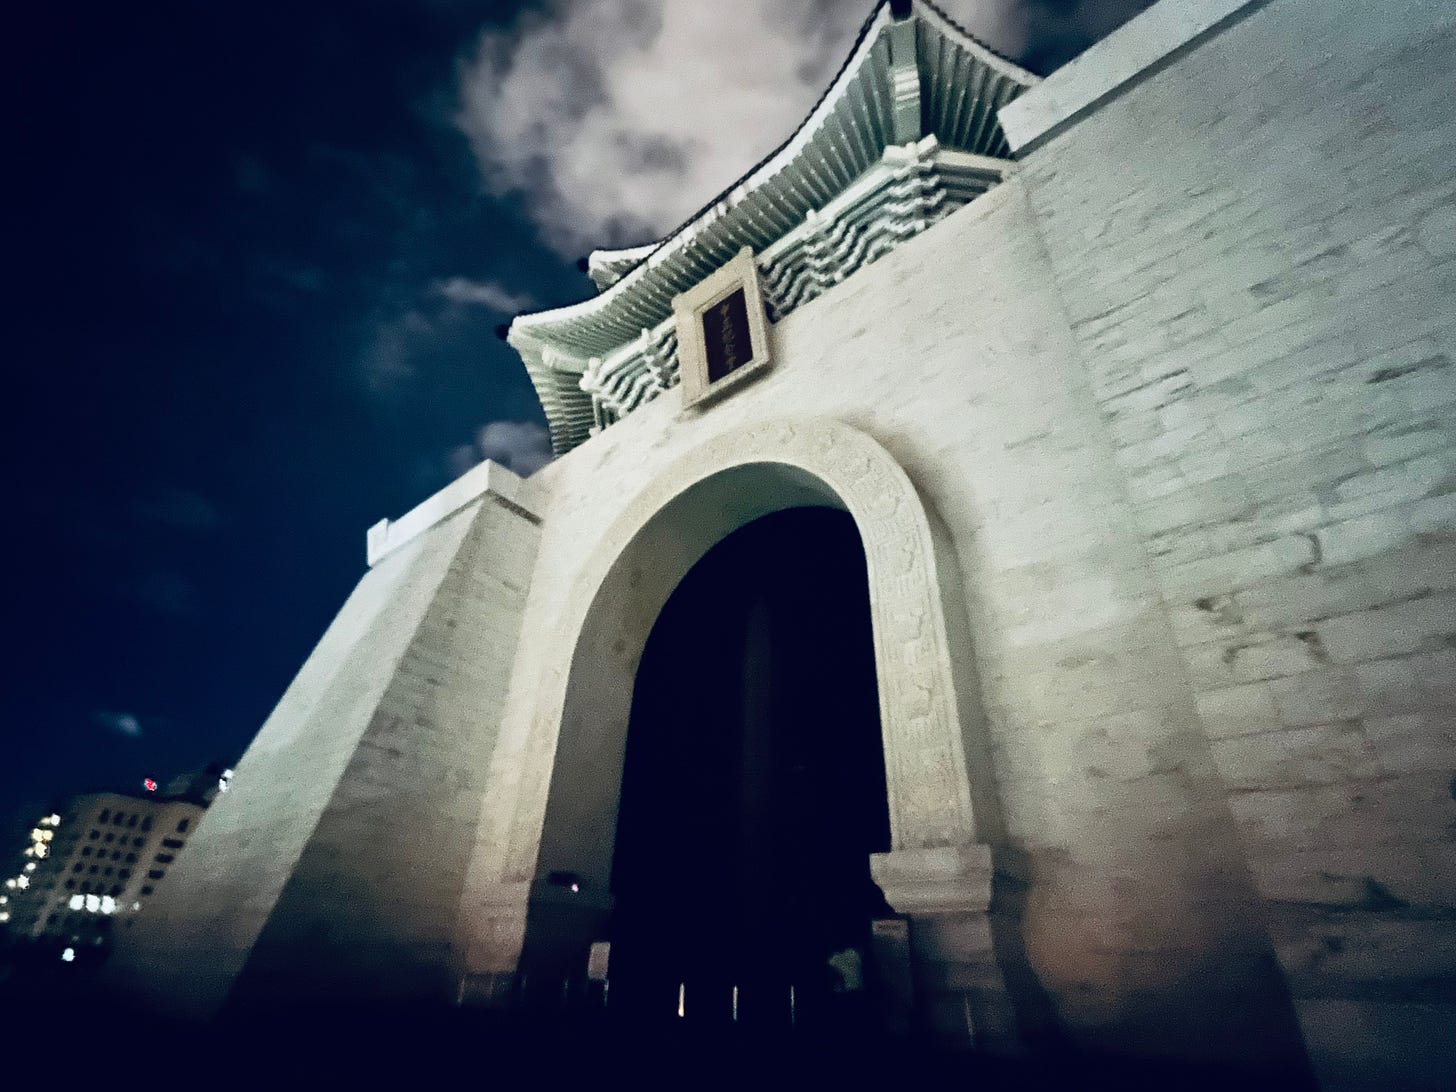 A tall, smooth white wall framing an archway into a pitch black entryway. The sharply upturned camera angle also reveals the underside of eaves decorated to look like the interlocking wooden brackets of a traditional Chinese palace.